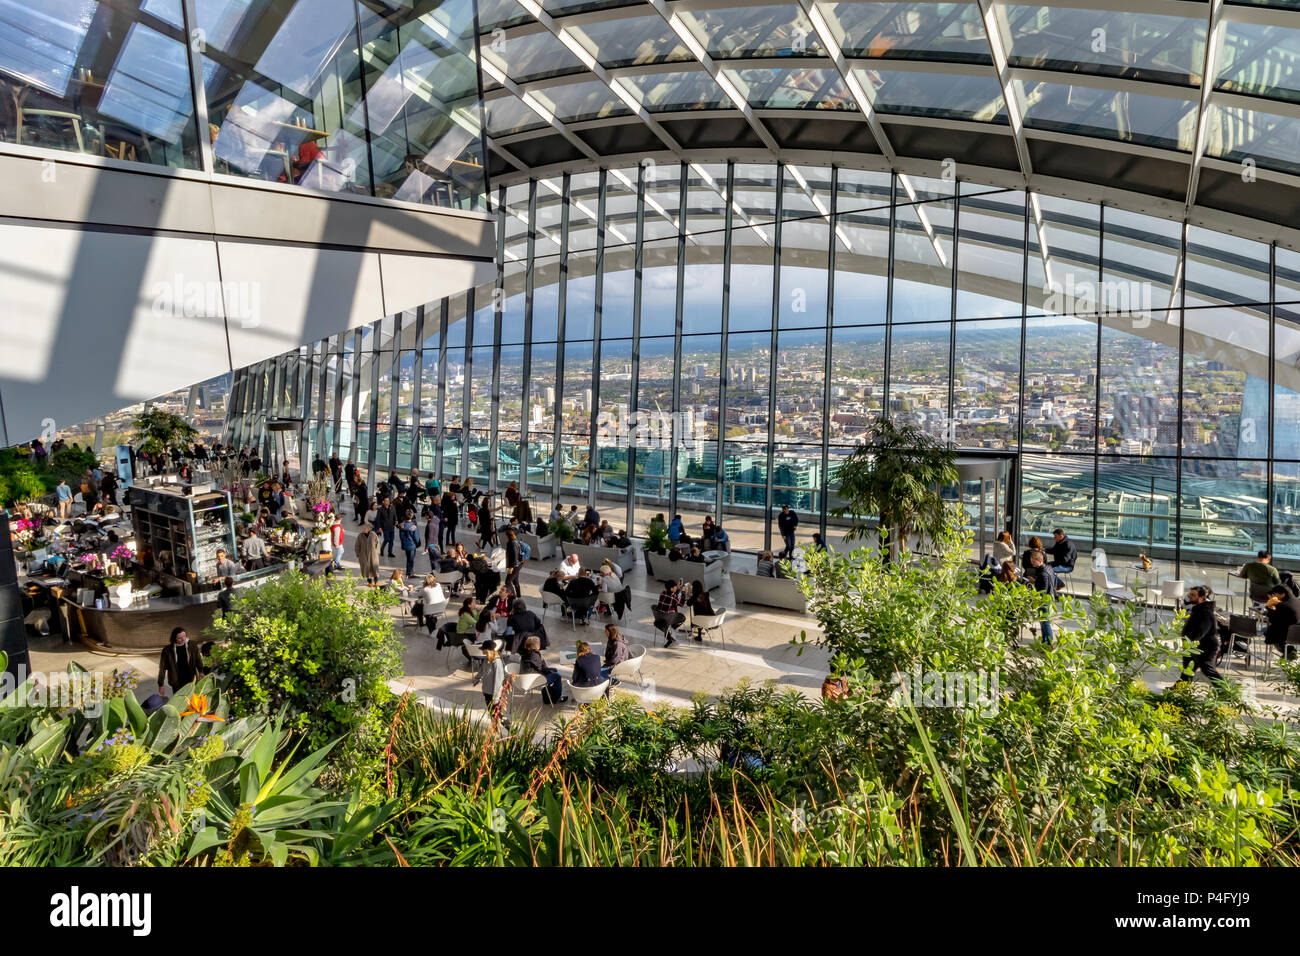 The Sky Garden, a public viewing gallery at the top of 20 Fenchurch Street , also known as The Walkie Talkie Building ,in The City Of London , UK Stock Photo